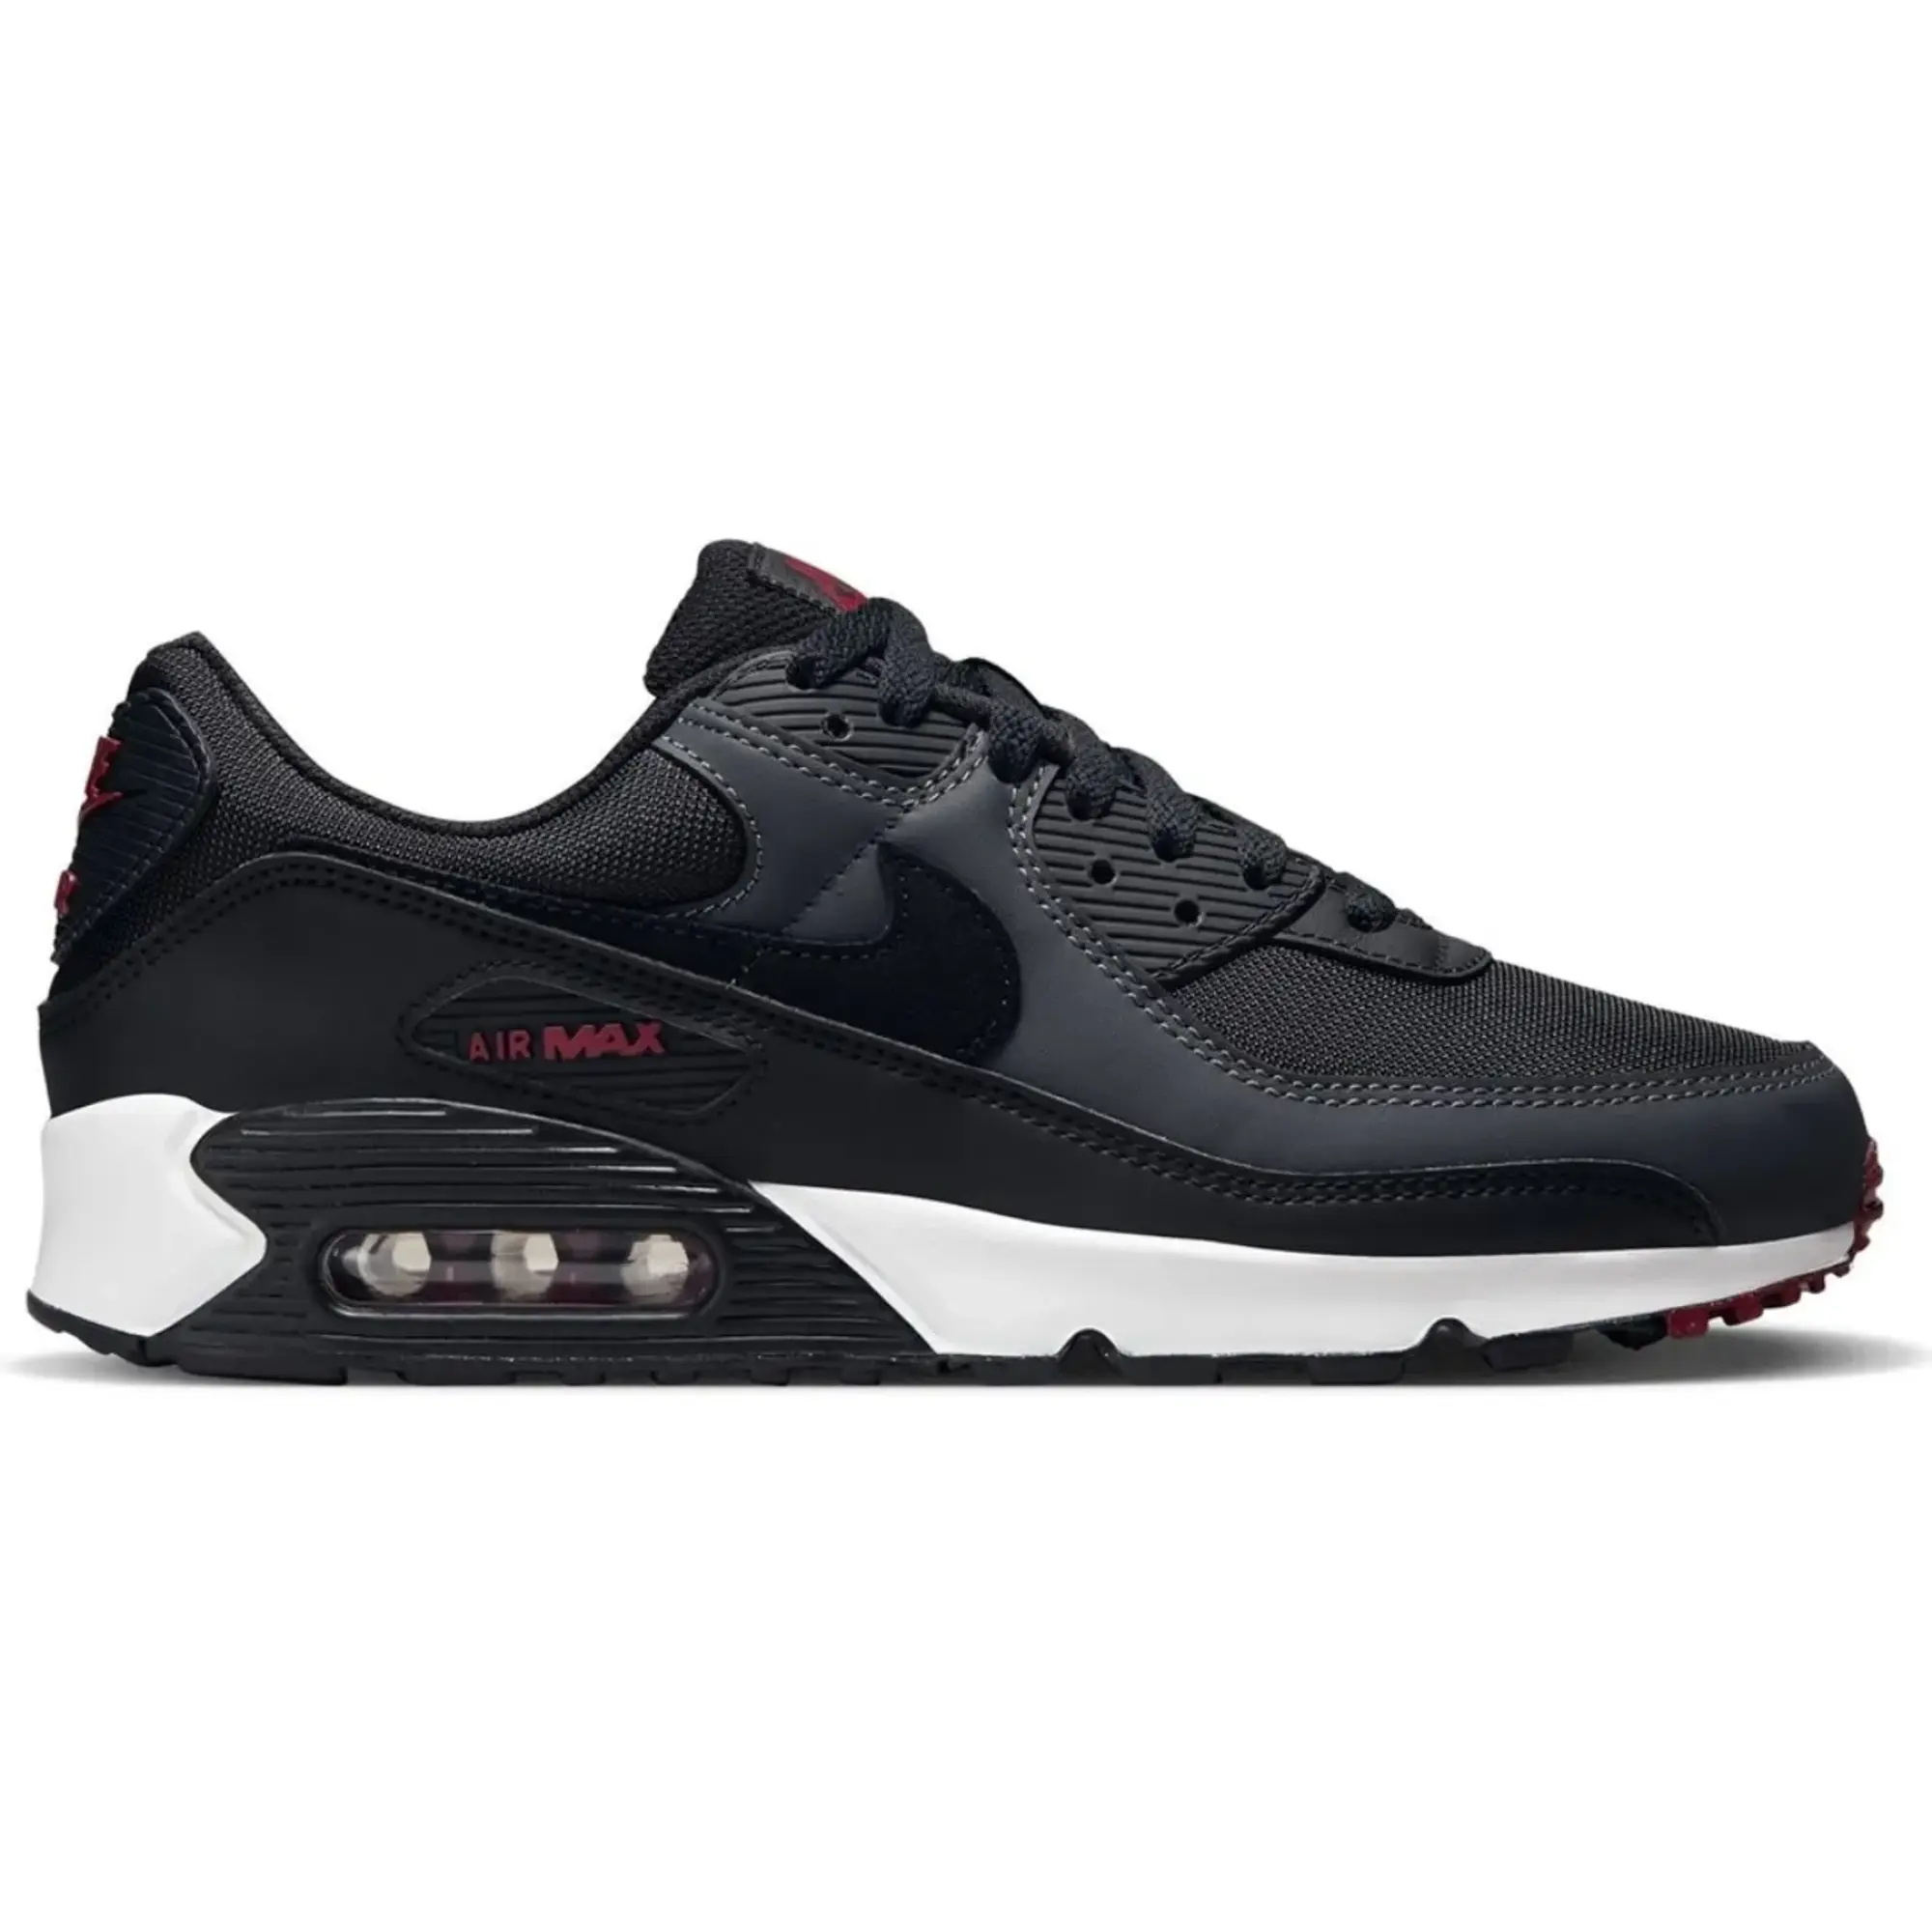 Nike Air Max 90 Trainer - Anthracite / Black / Team Red